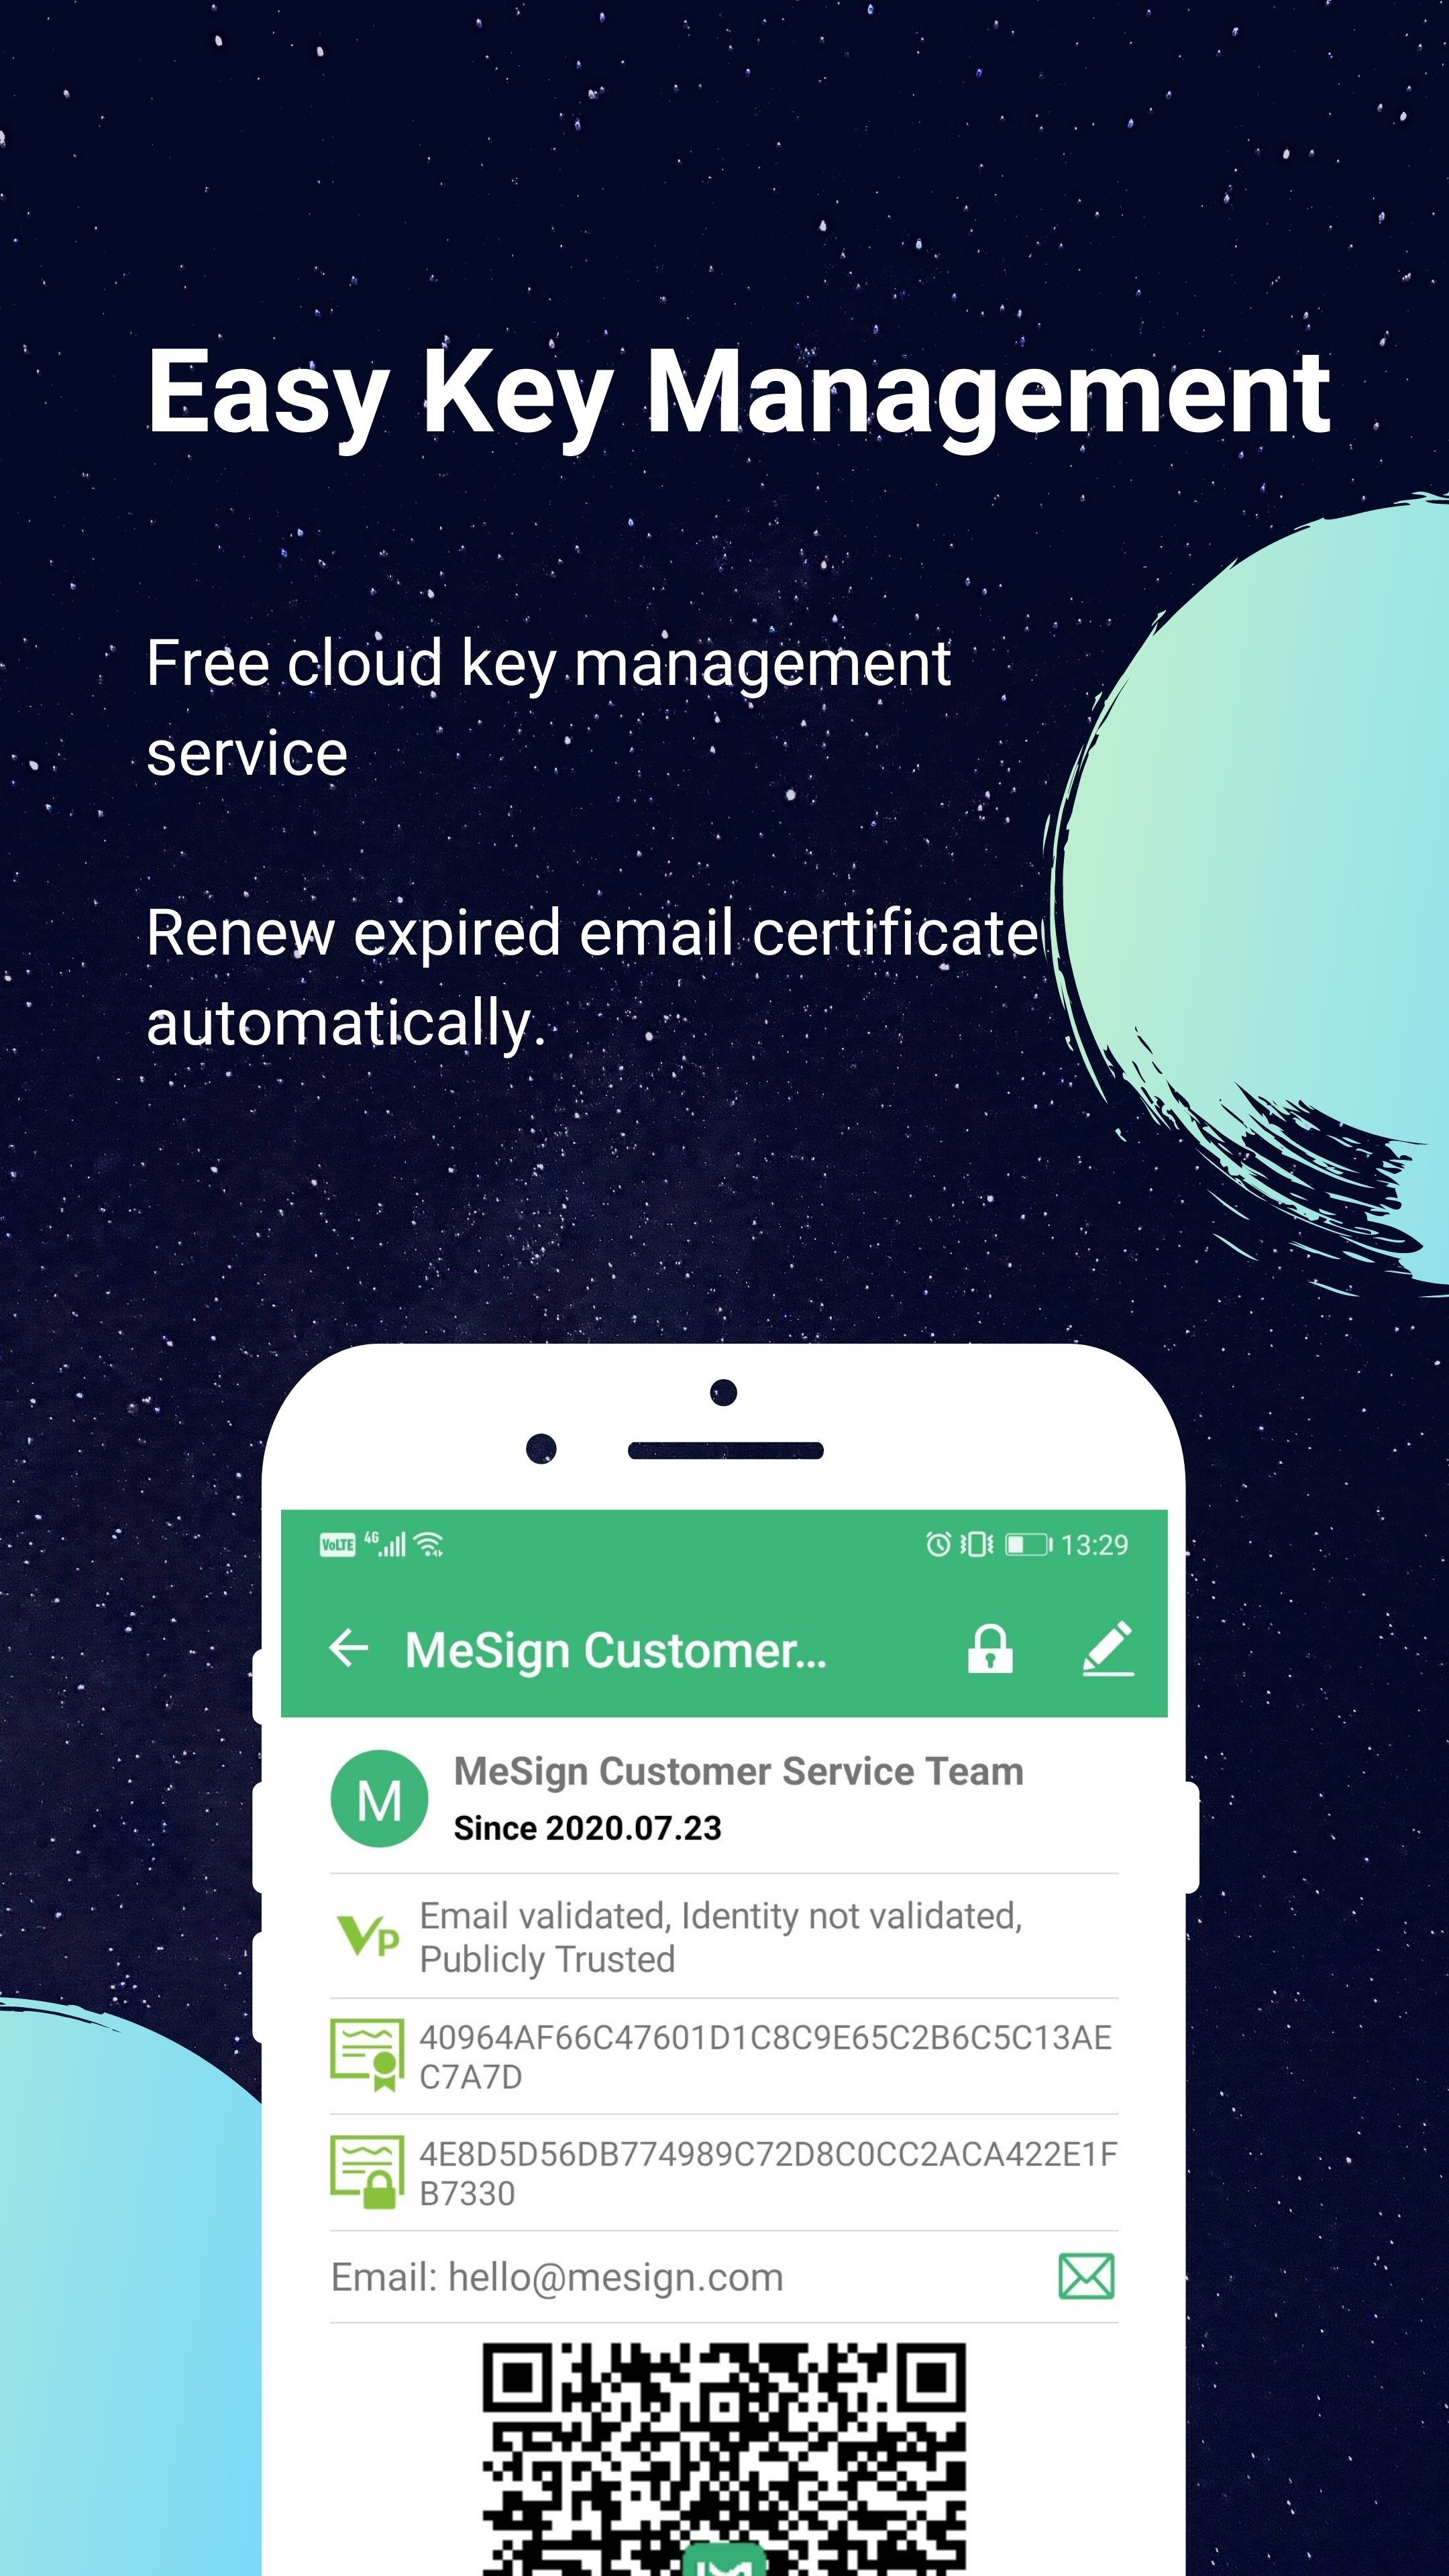 Cloud key management: manage your key much easier